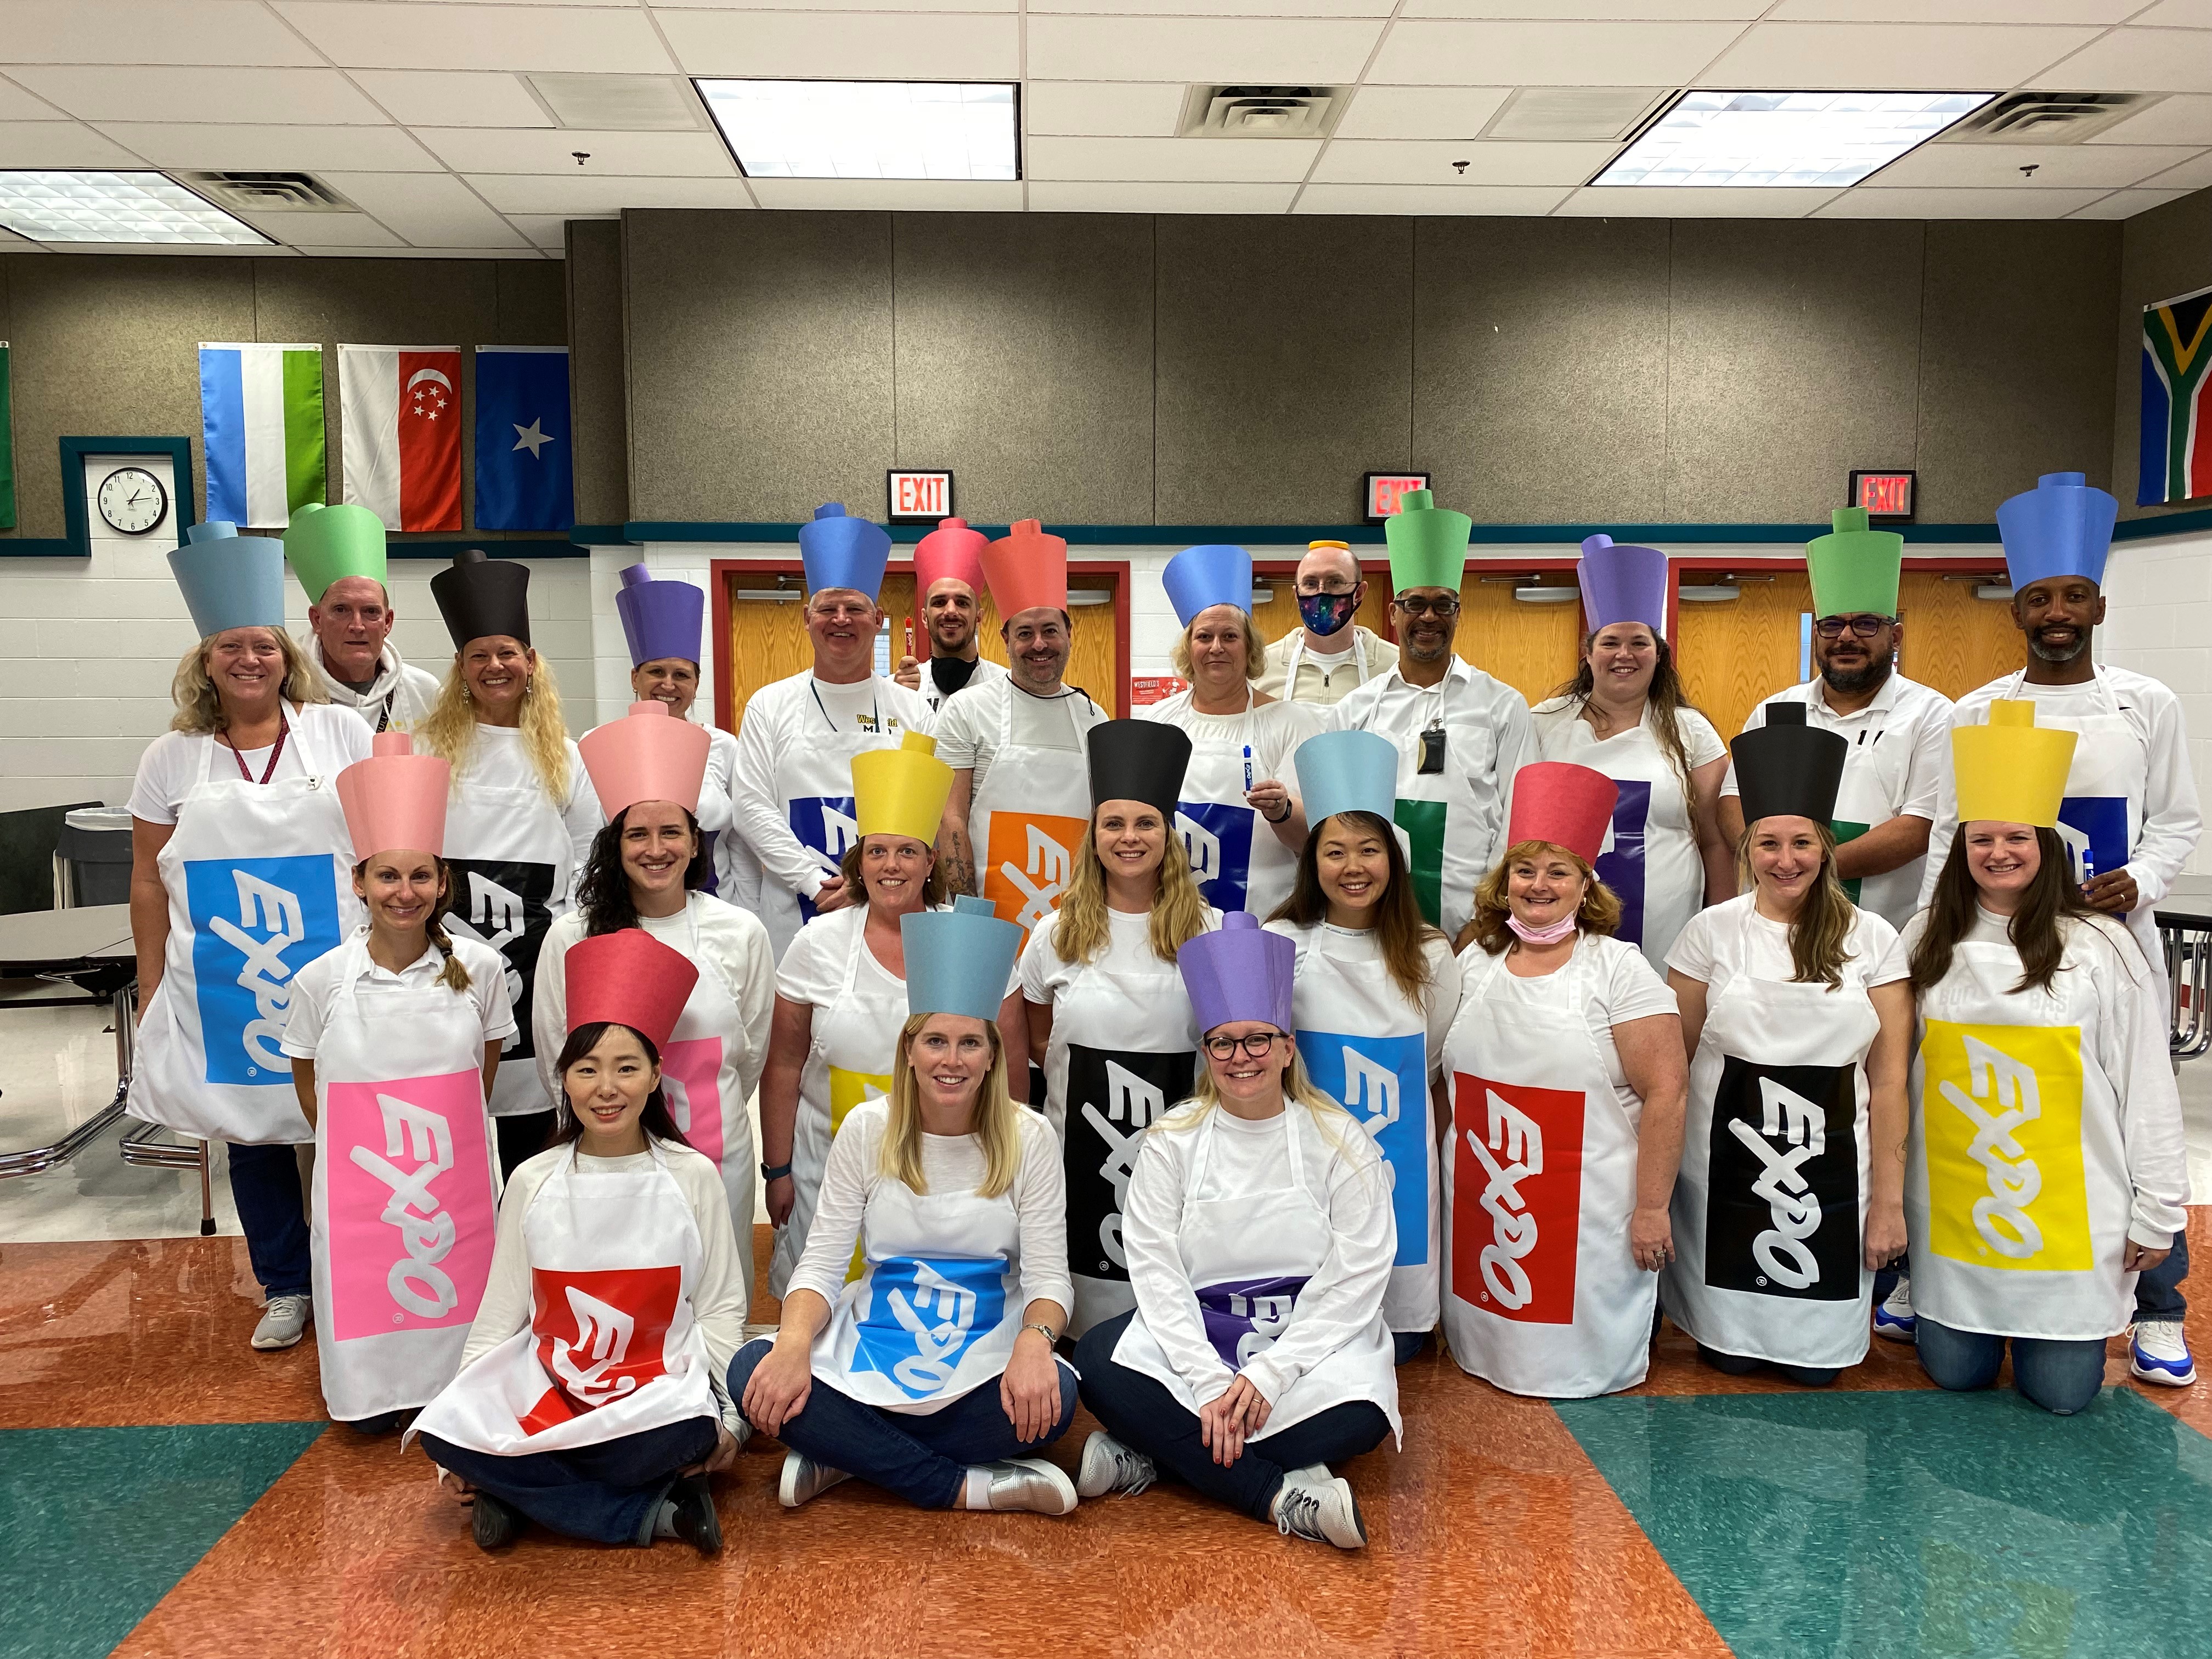 Members of the math department pose in their group Halloween costume. They are dressed as expo markers.